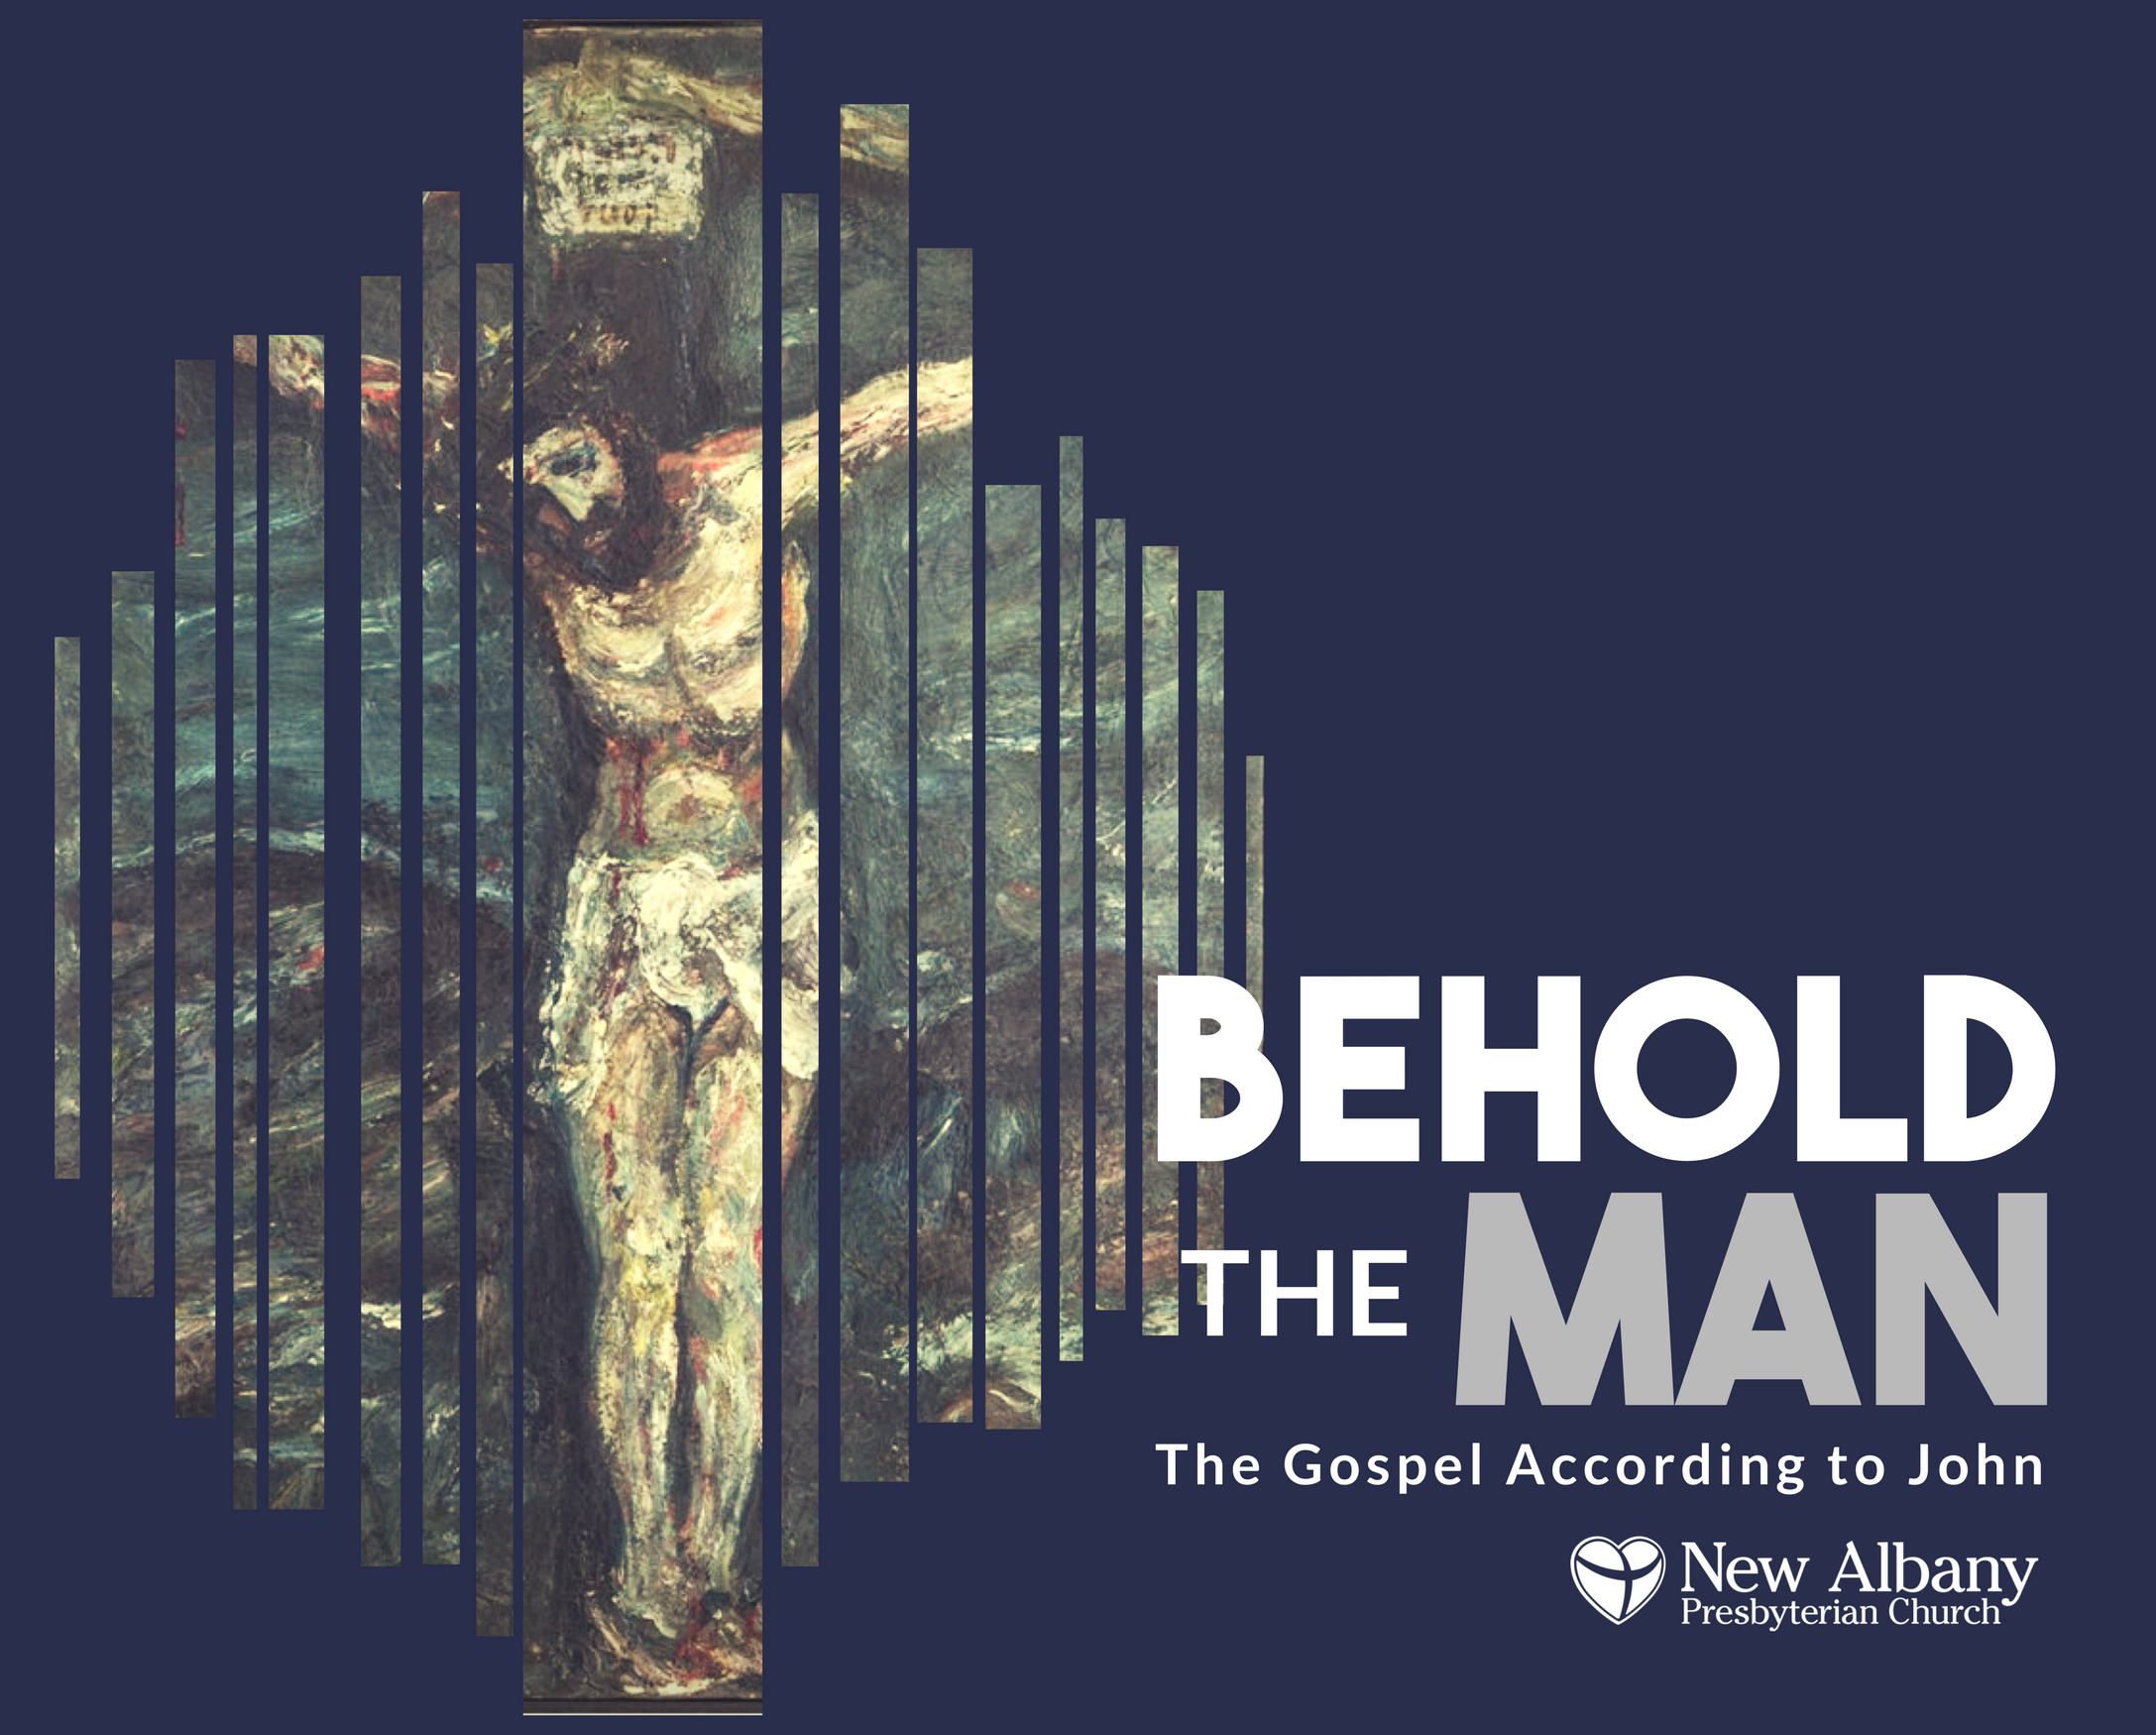 Behold the Man: Invited Into Abundant Life